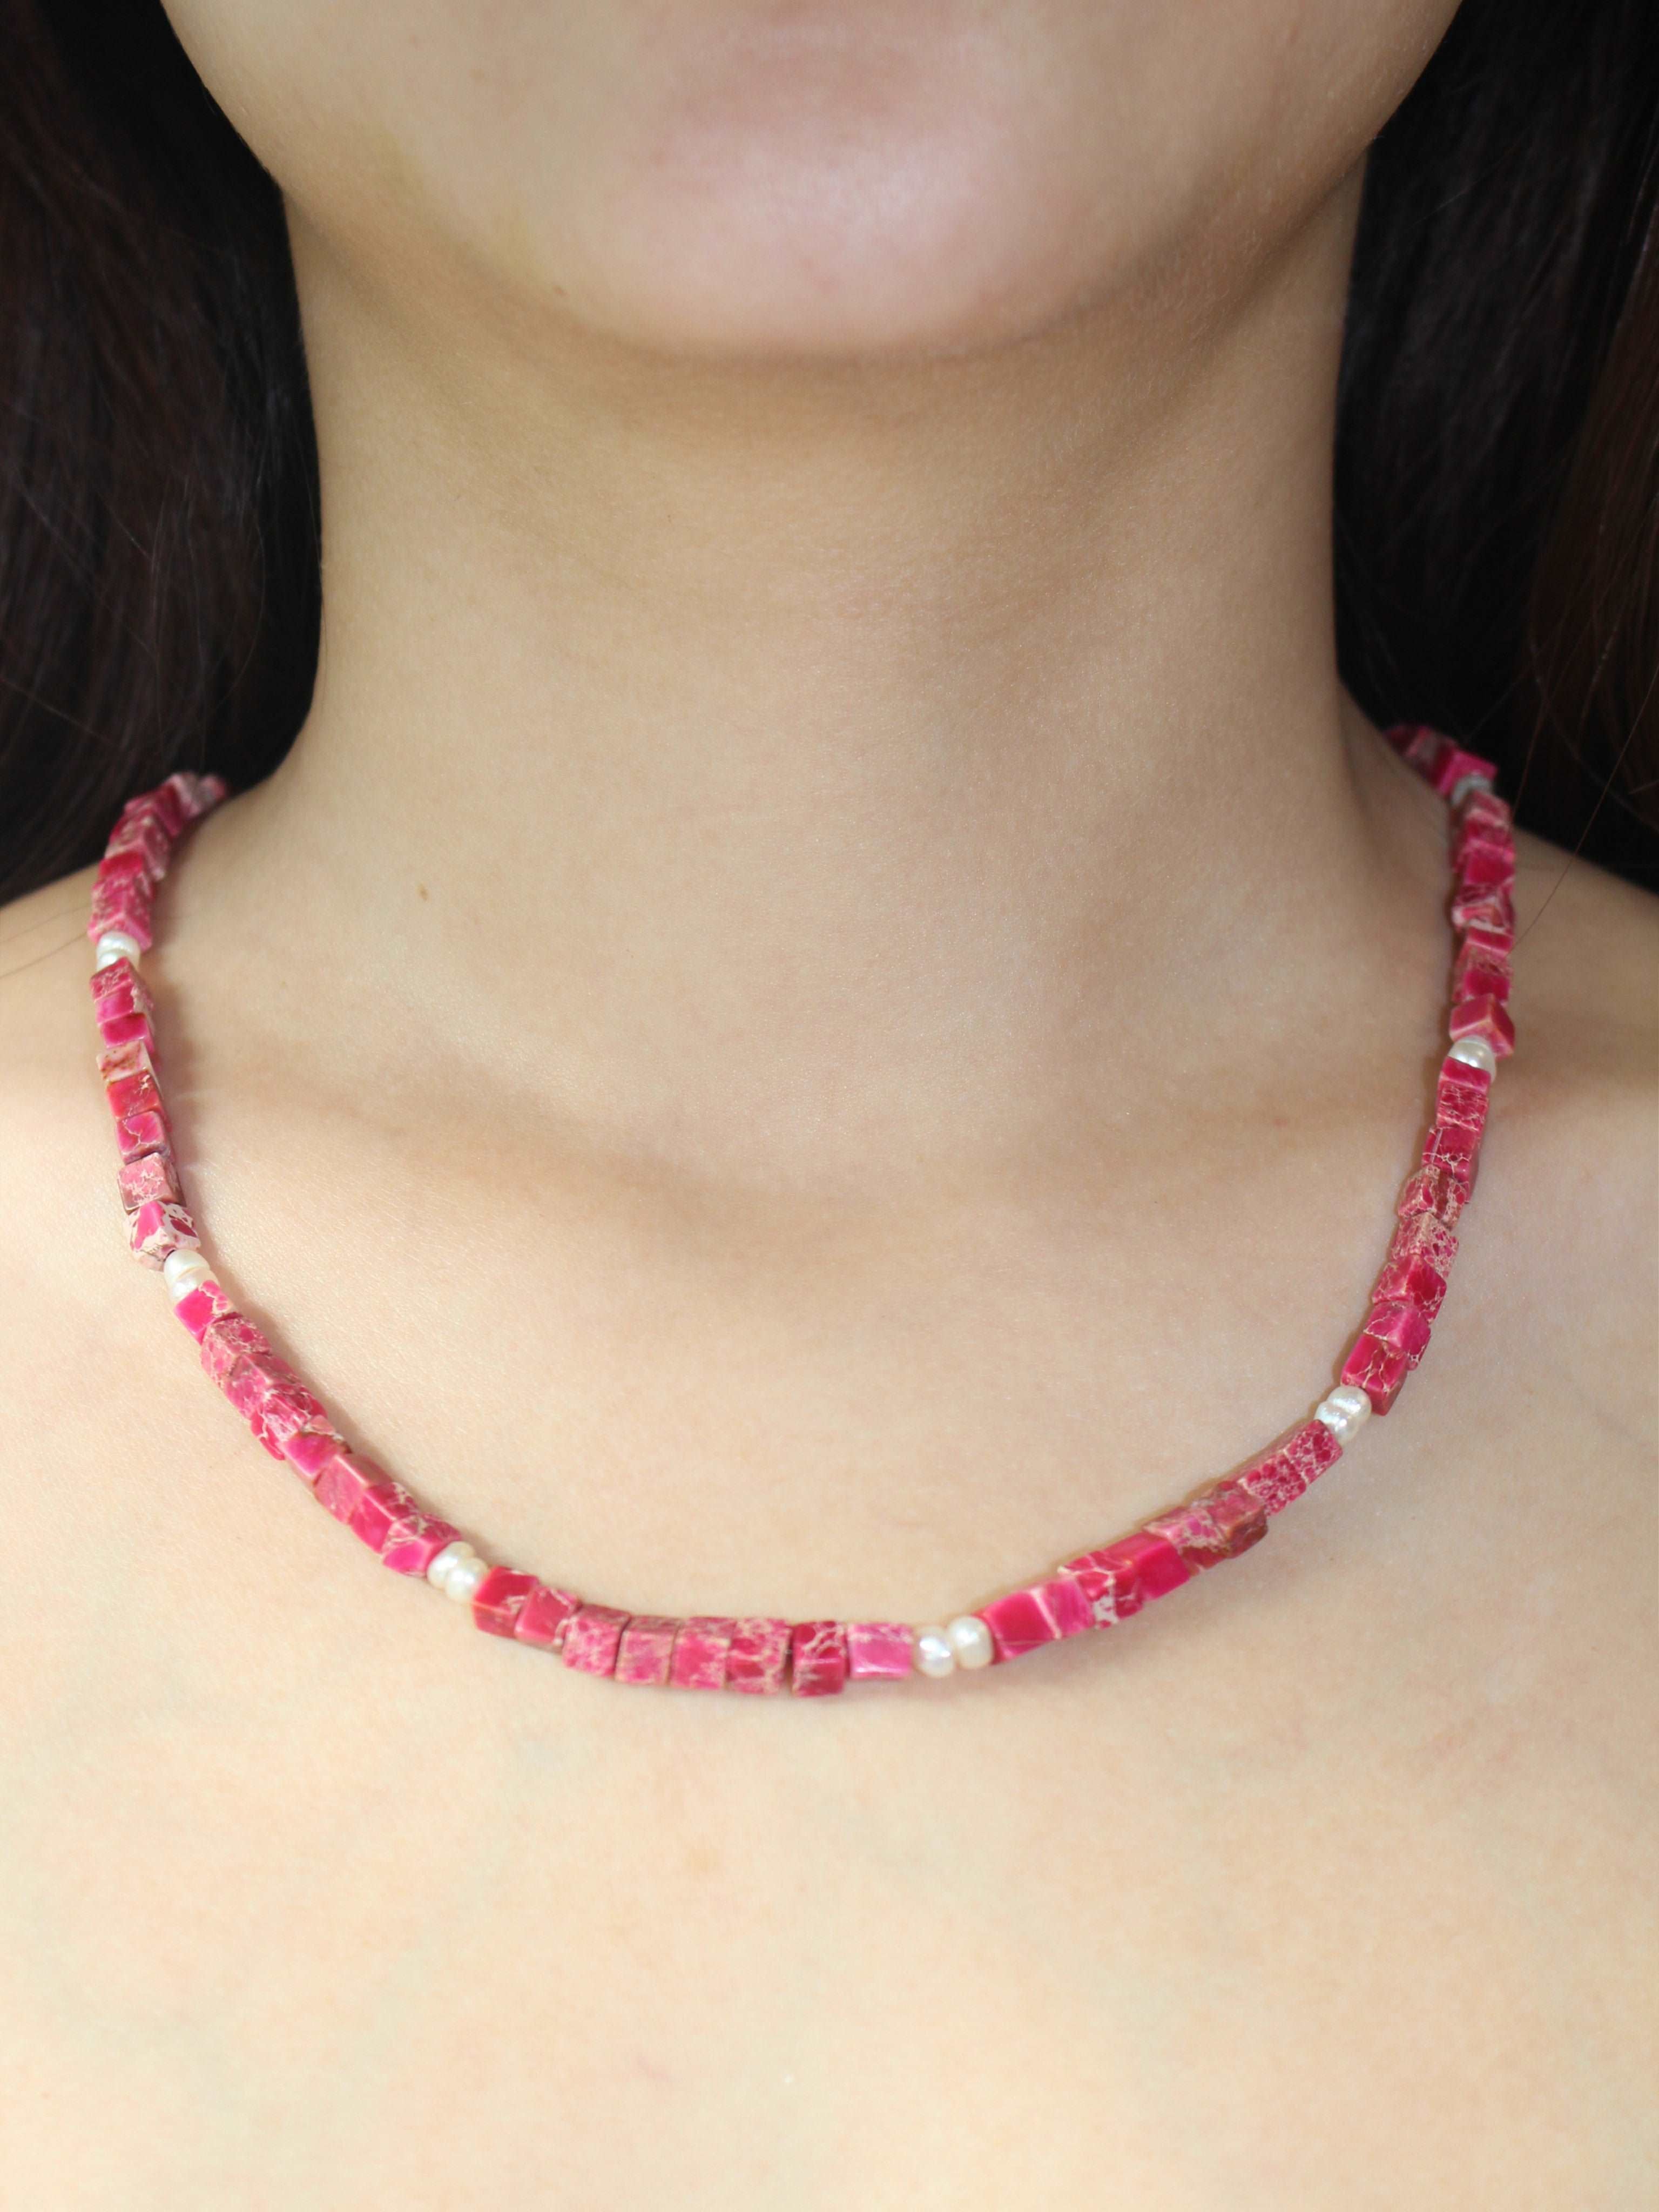 wearing Handmade Rose Imperial Stone Bead Necklace